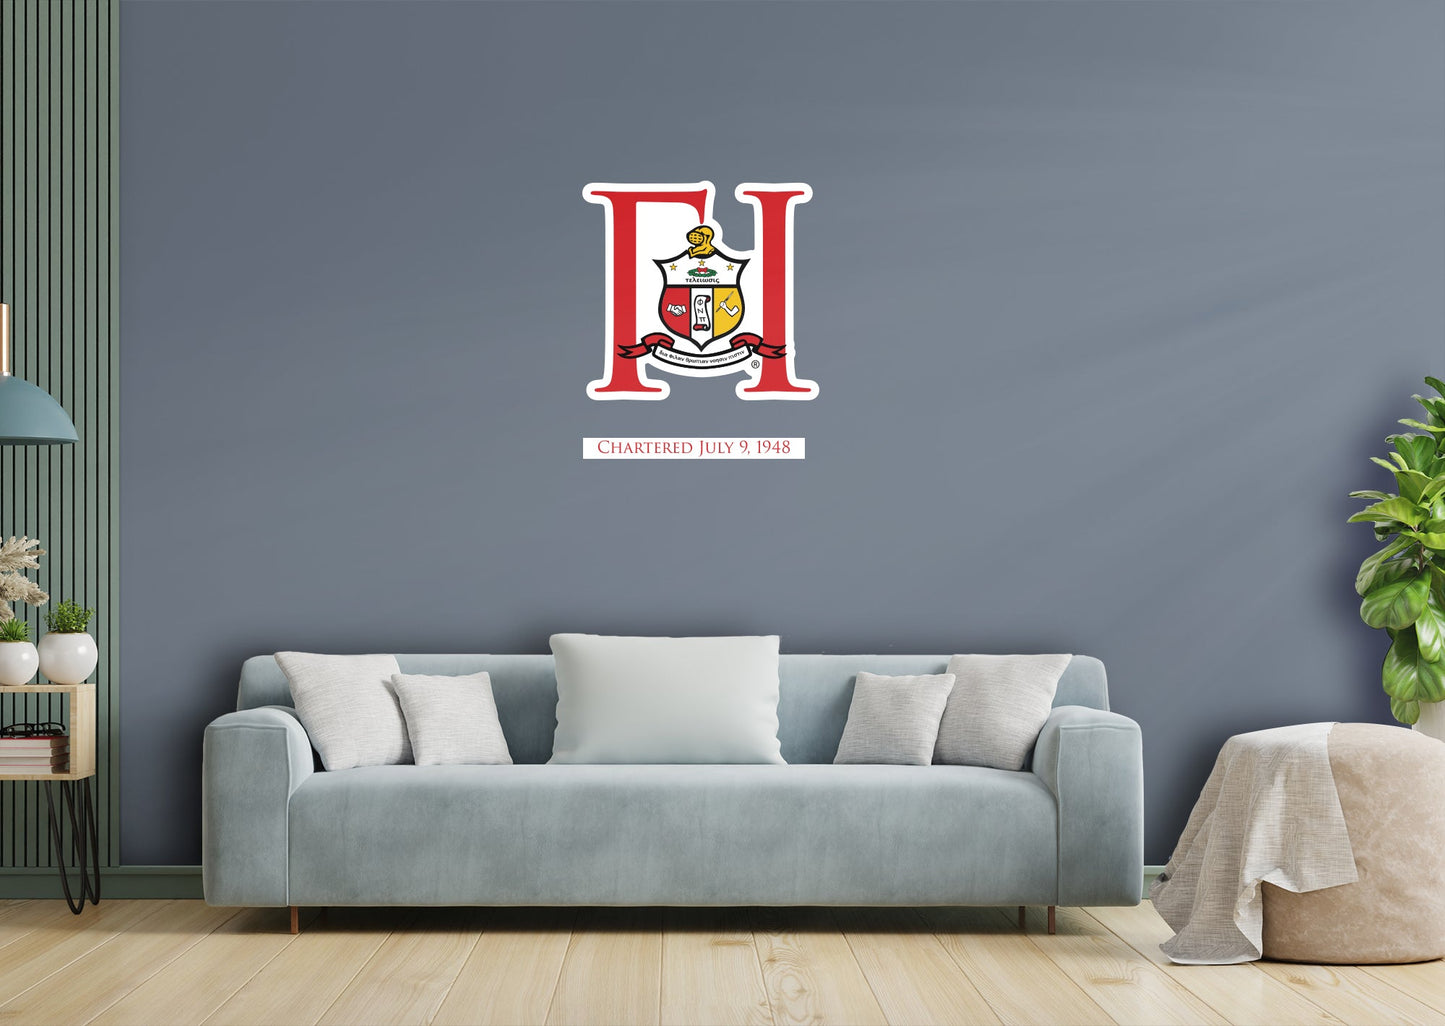 Kappa Alpha Psi: Gamma Kappa Chapter Date RealBig - Officially Licensed Fraternity Removable Adhesive Decal